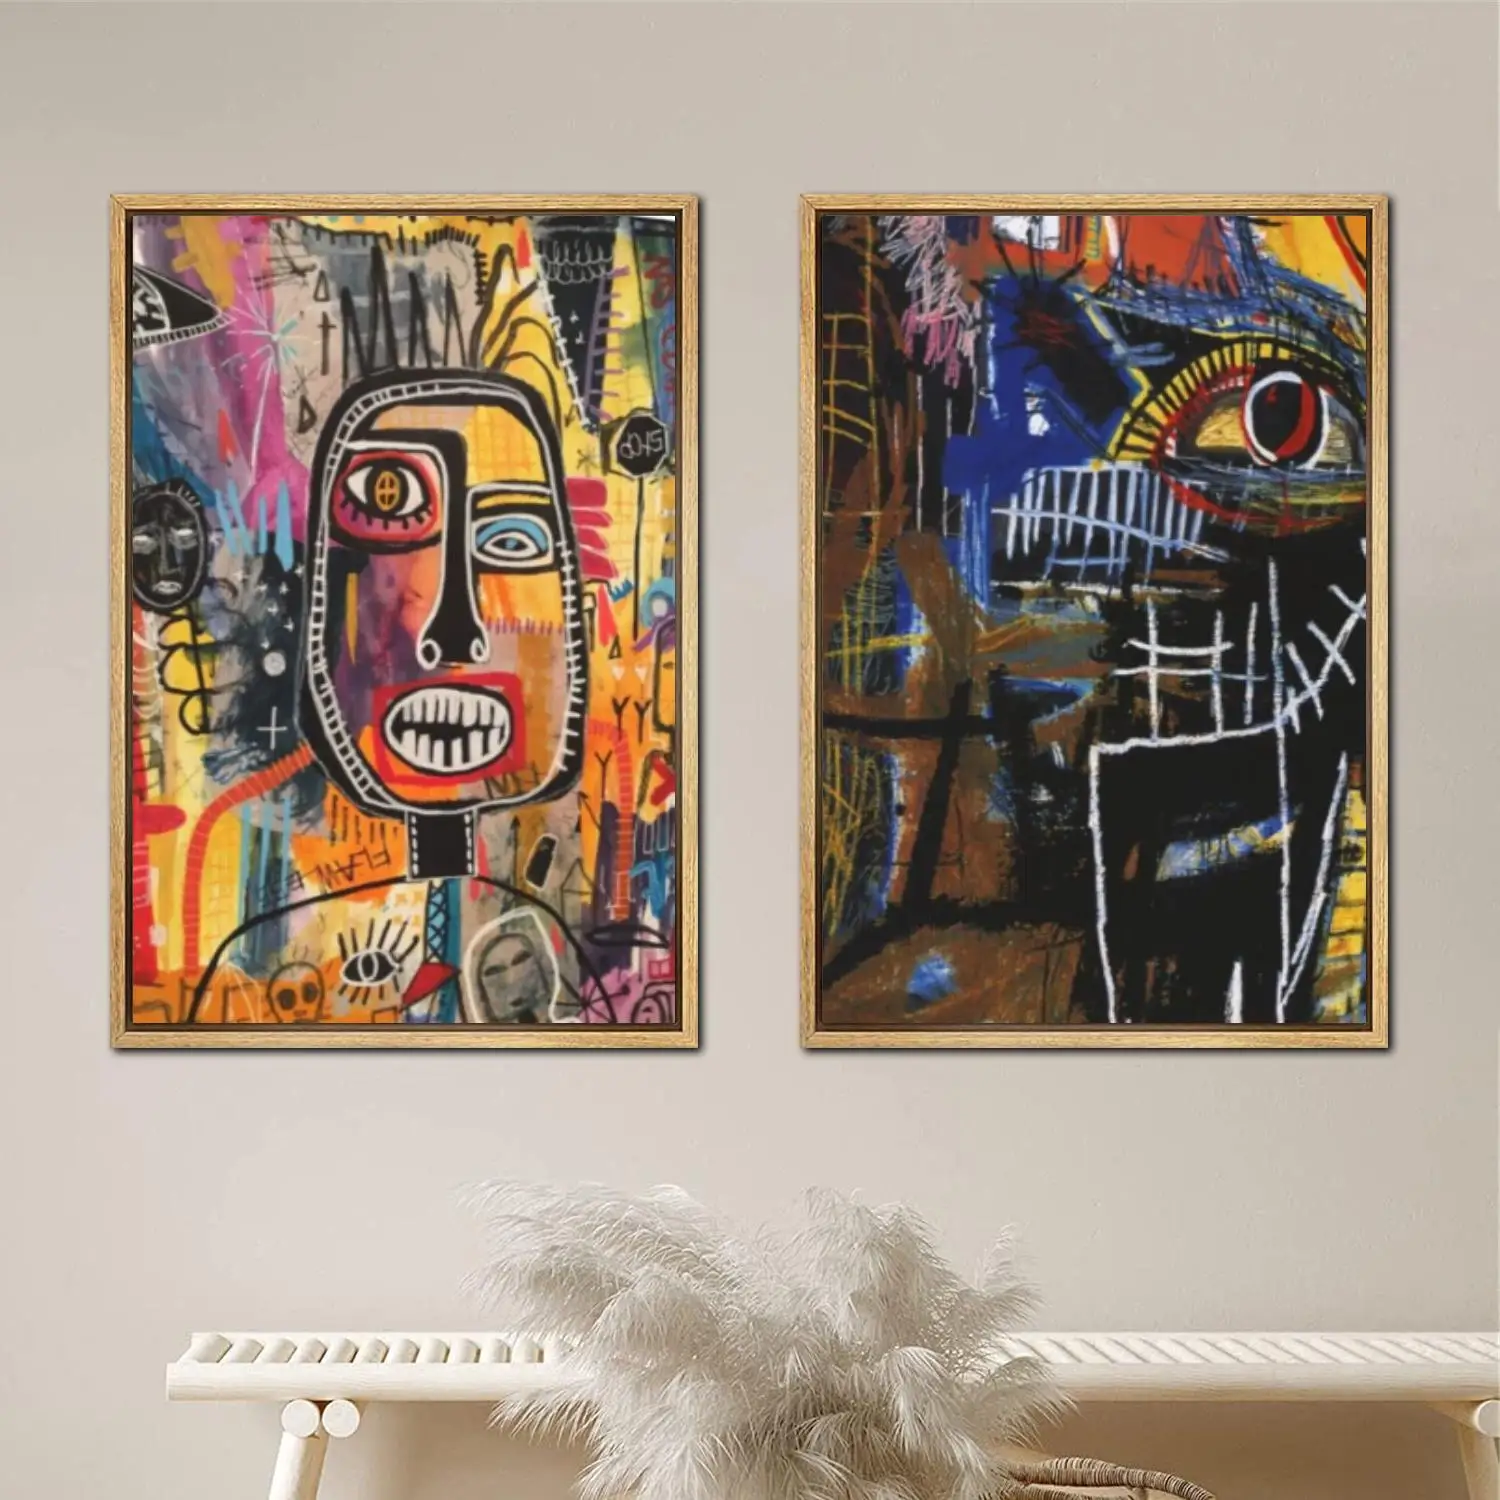 jean michel basquiat Poster Painting 24x36 Wall Art Canvas Posters room decor Modern Family bedroom Decoration Art wall decor